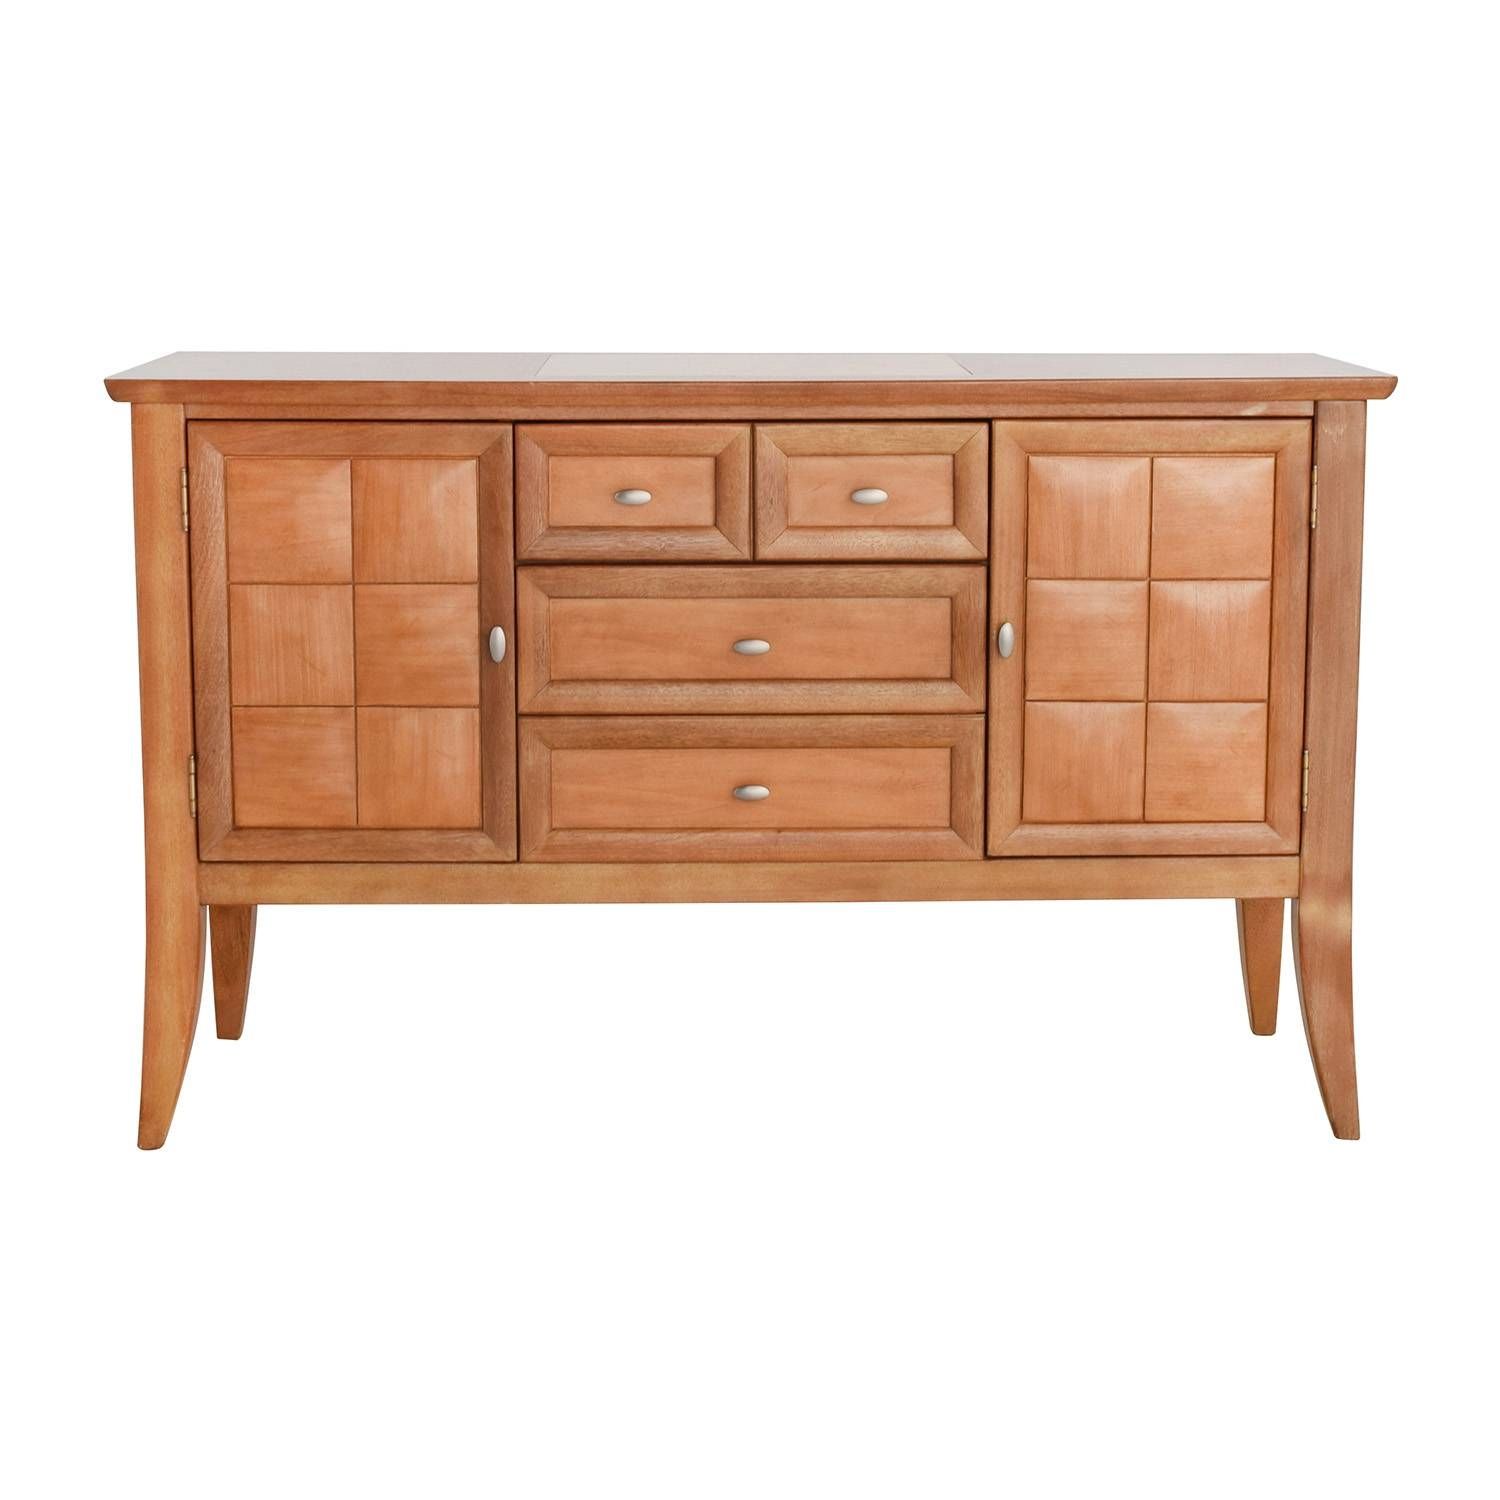 90% Off – Thomasville Thomasville Buffet Table / Storage With Regard To Most Recent Thomasville Sideboards (View 2 of 15)